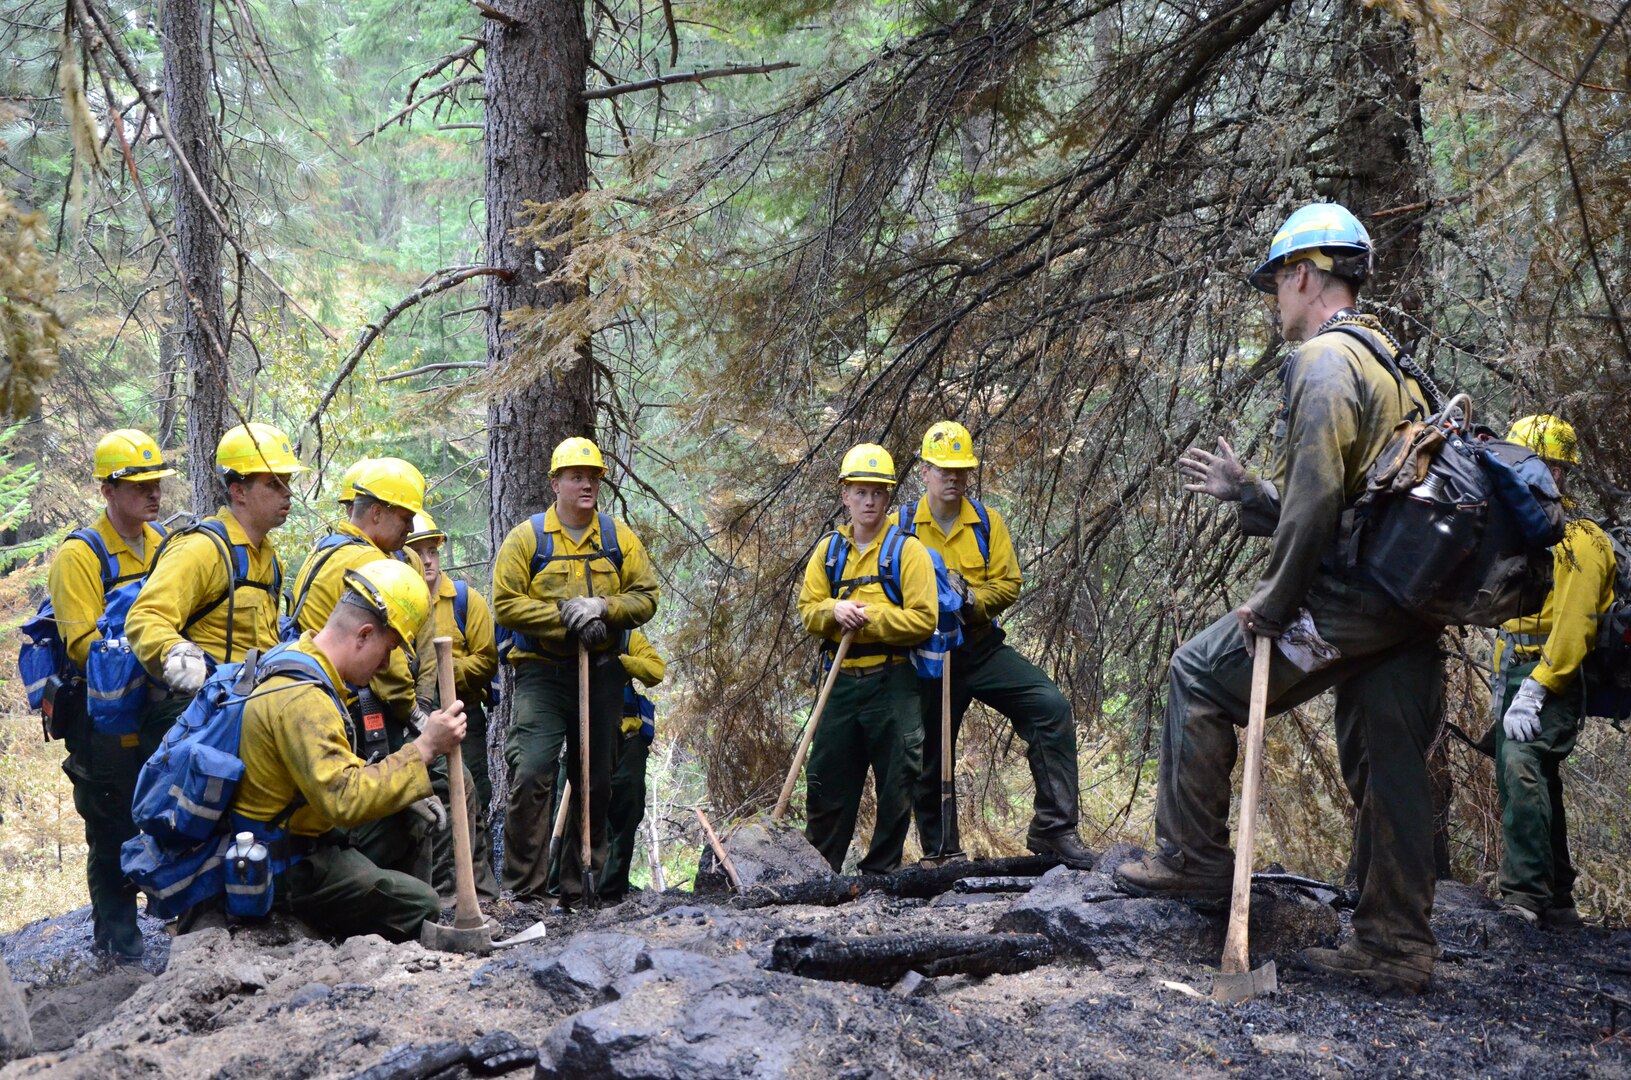 Guard members with the 1-303rd Cavalry Regiment review mopping techniques before continuing to clear an area recently affected by the Chiwaukum Complex fires near Leavenworth, Wash., July 23, 2014. Mopping is a technique used to clear areas of hot spots, smoldering embers that could potentially reignite fires by conducting land sweeps. 